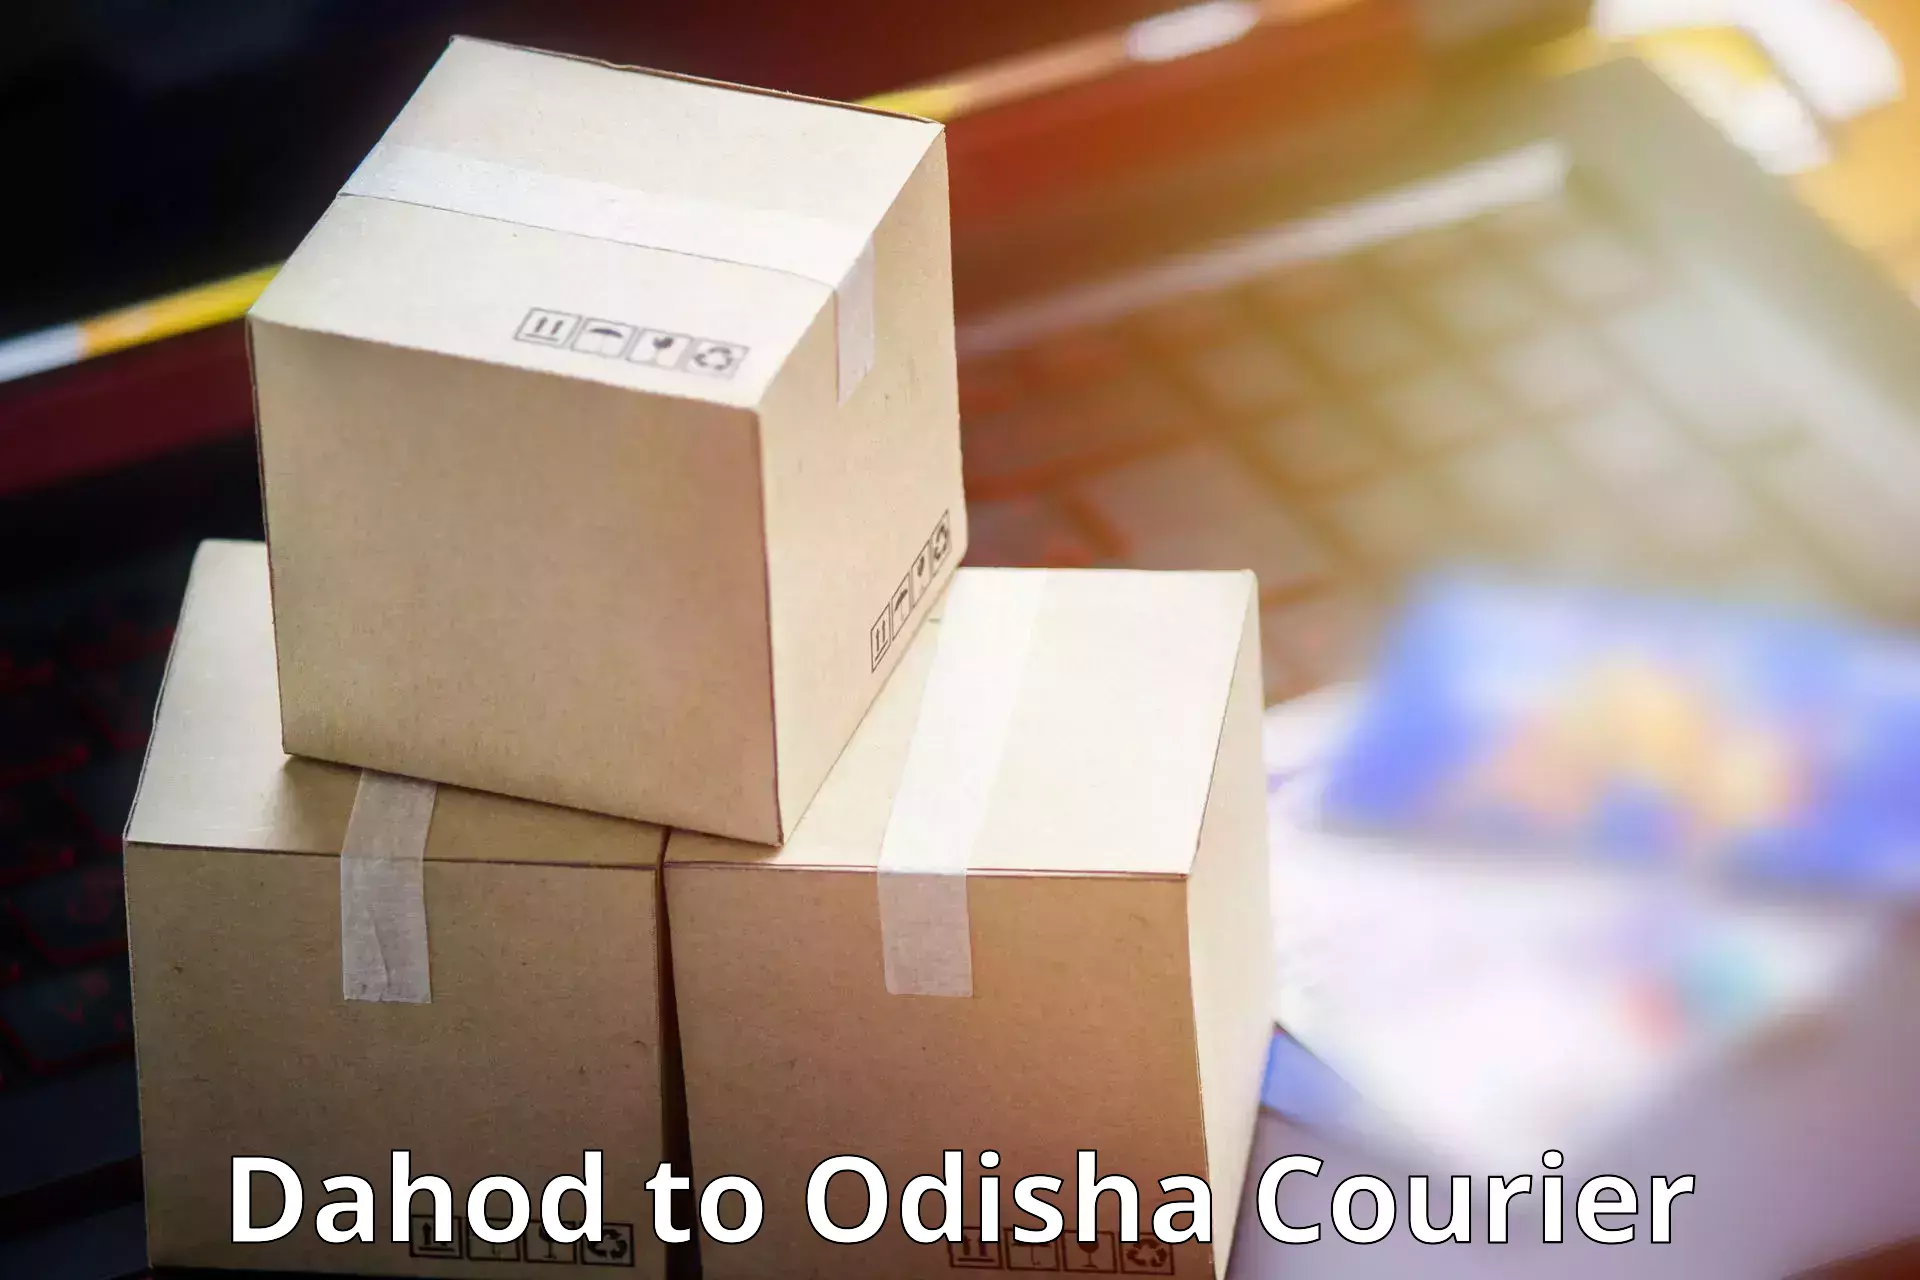 User-friendly delivery service Dahod to Pipili